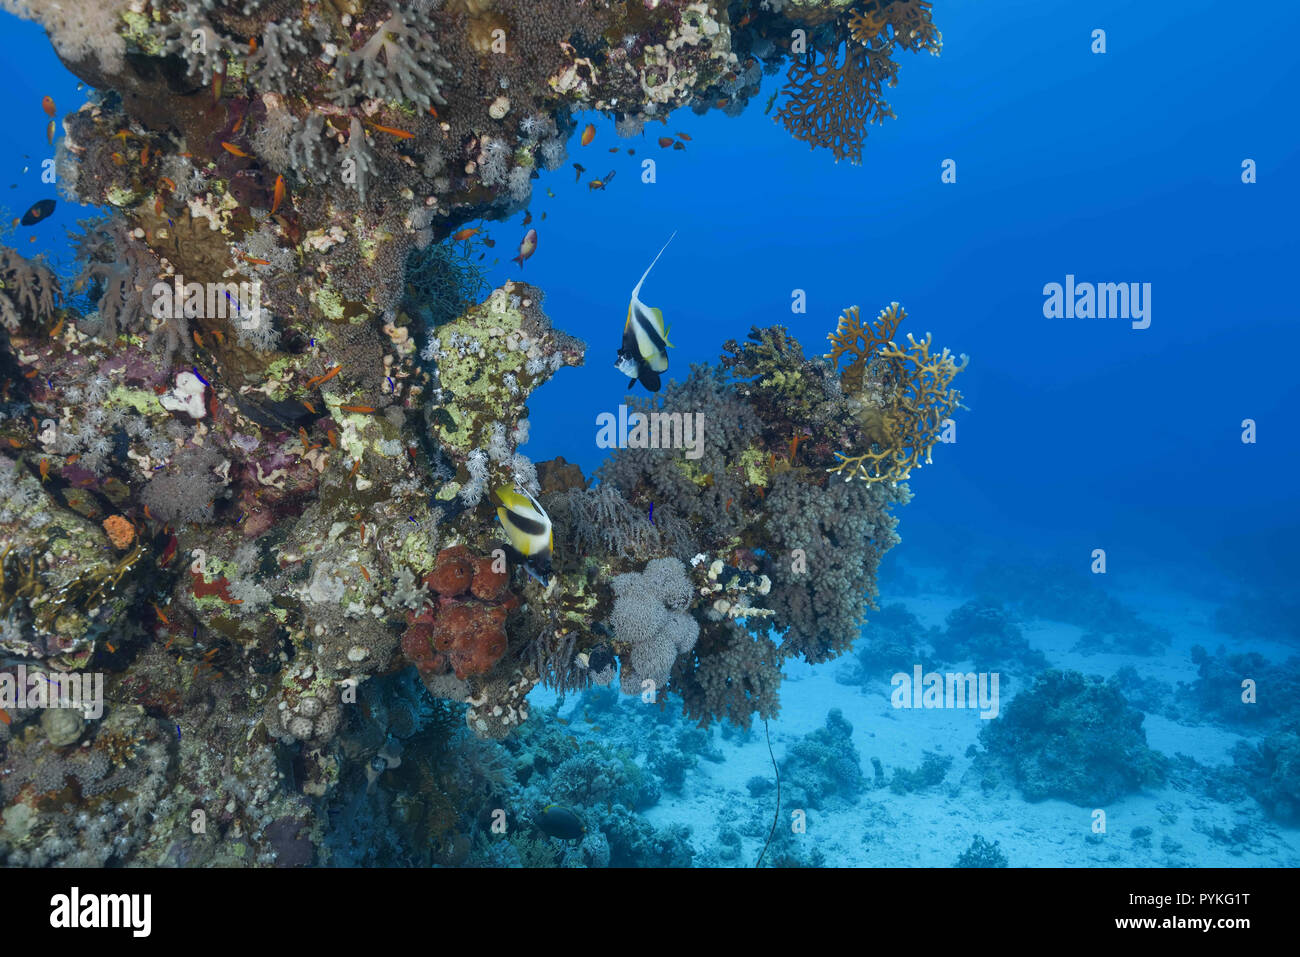 Red Sea, Marsa Alam, Egypt, Africa. 1st Aug, 2018. Underwater landscape with beautiful coral reef and pair Red Sea Bannerfish, Heniochus intermedius Credit: Andrey Nekrasov/ZUMA Wire/Alamy Live News Stock Photo